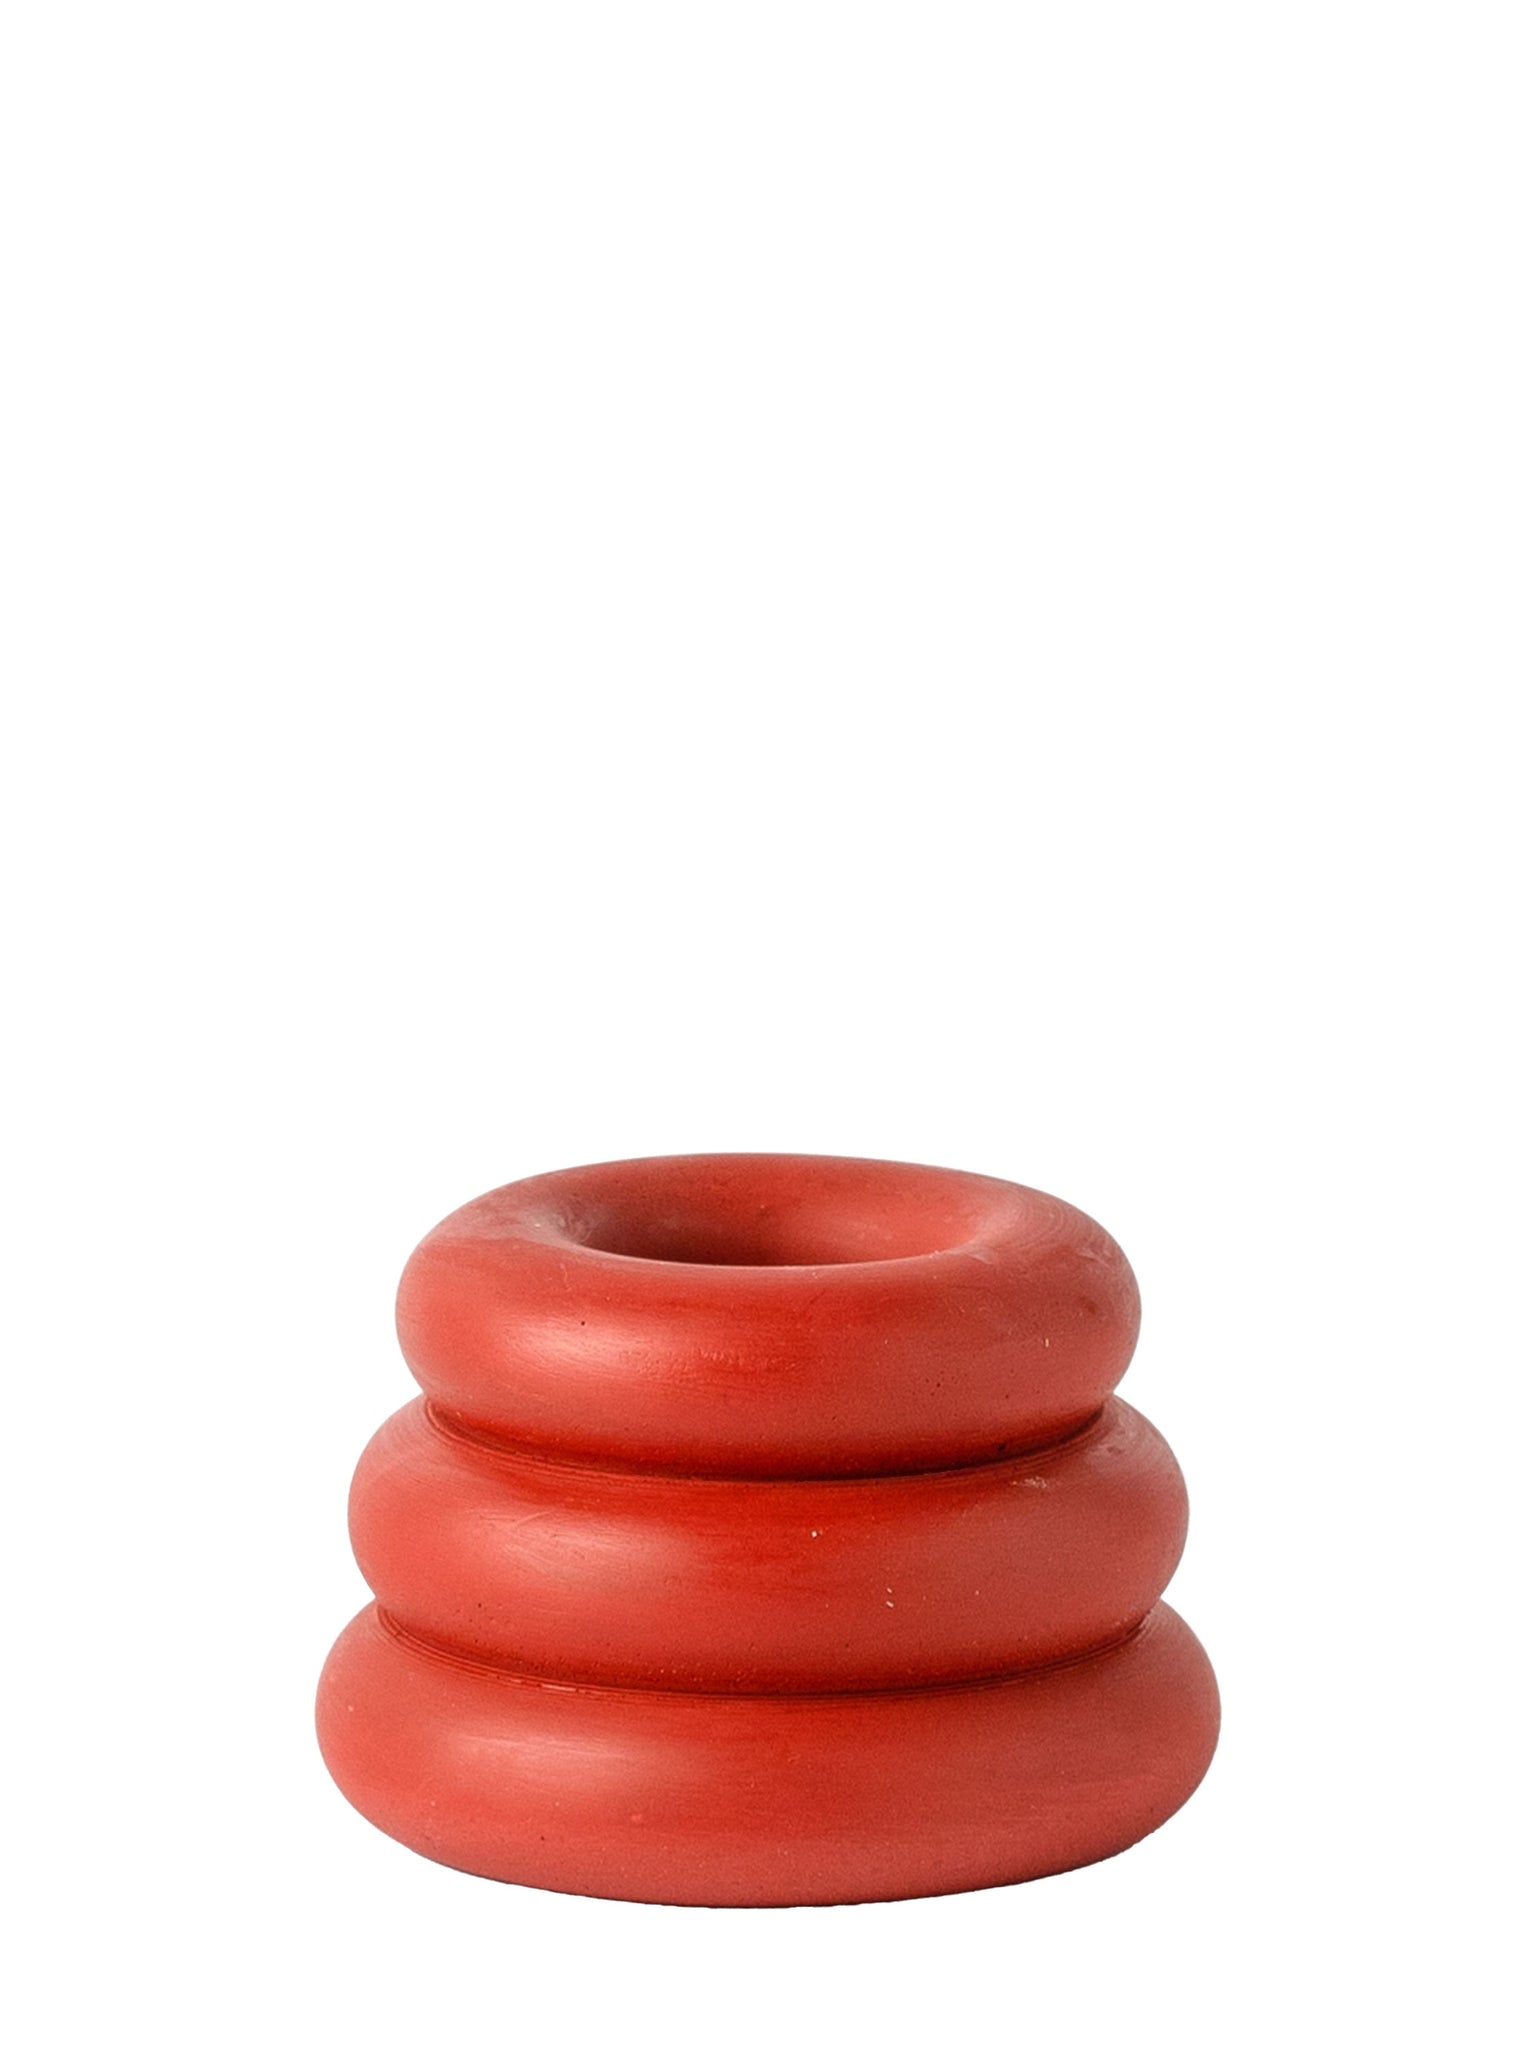 red Jesmonite Candleholder by Yod and Co